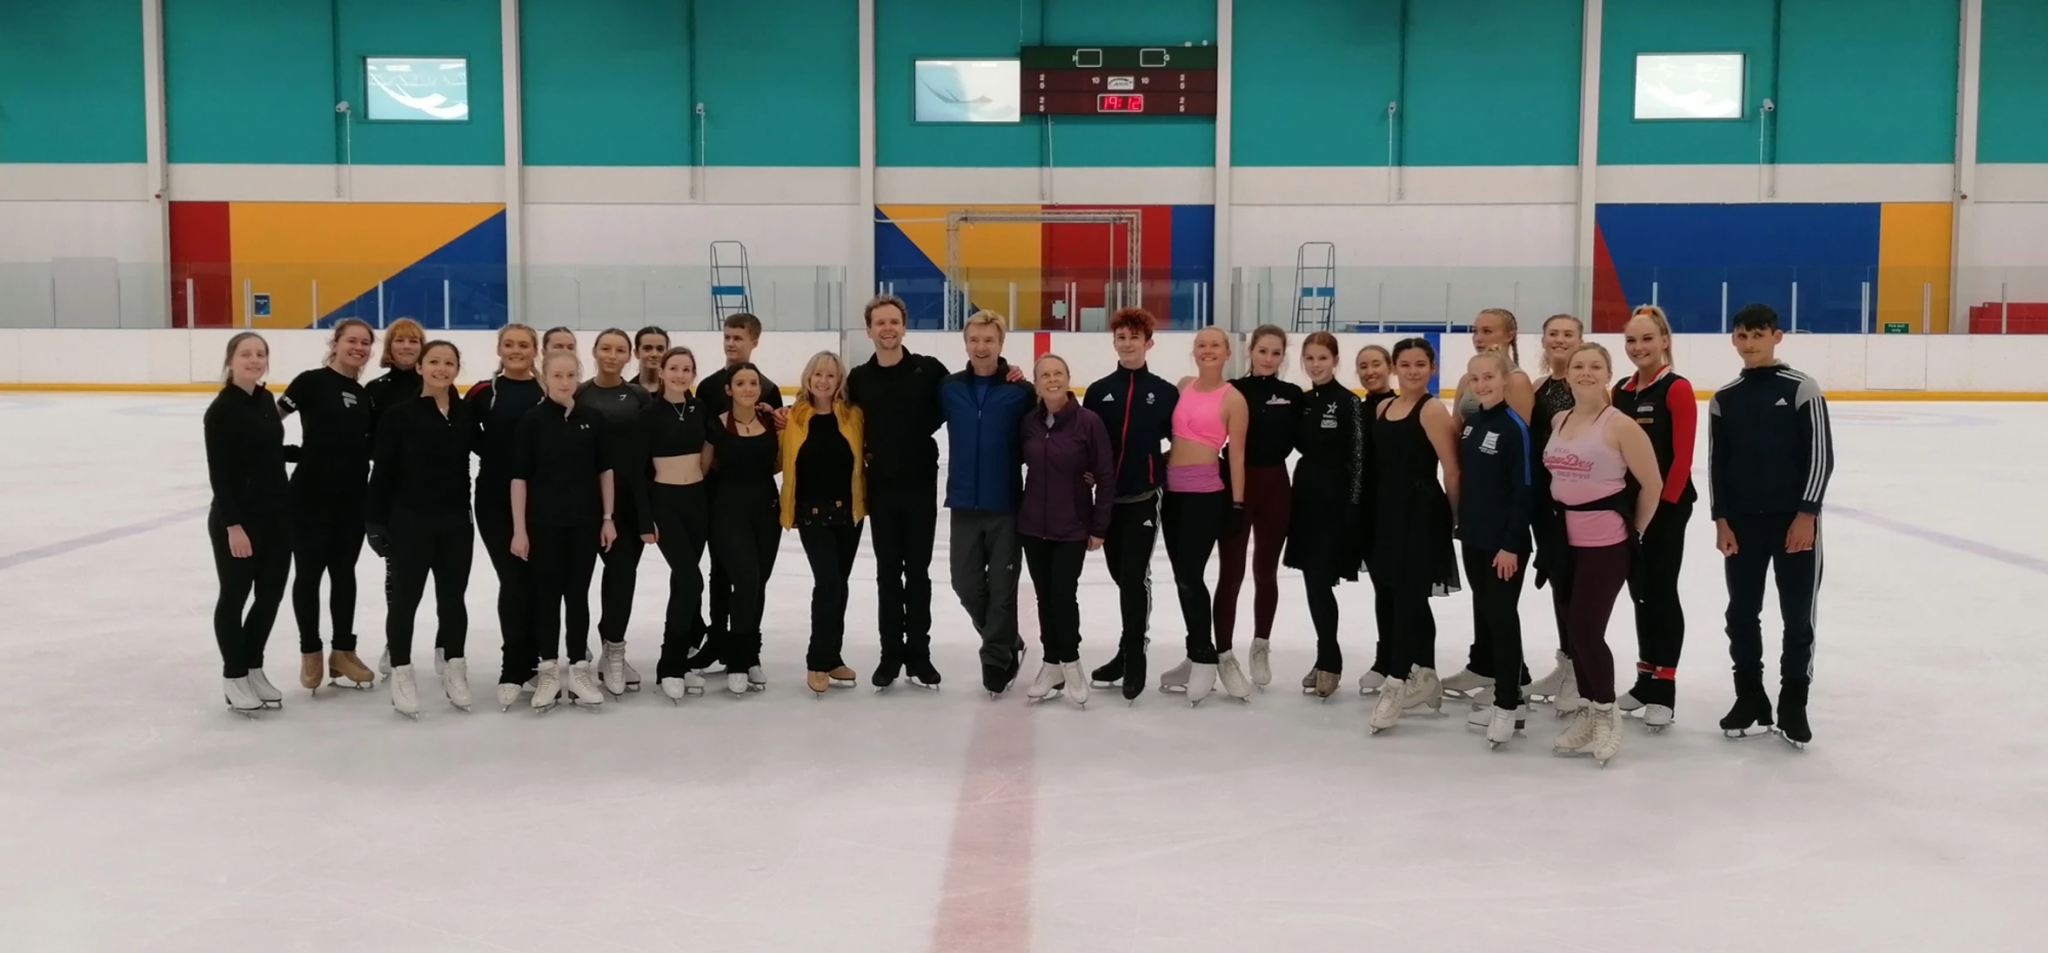 Jayne Torvill and Christopher Dean led the first weekend of the British Ice Skating Academy of Dance ©British Ice Skating